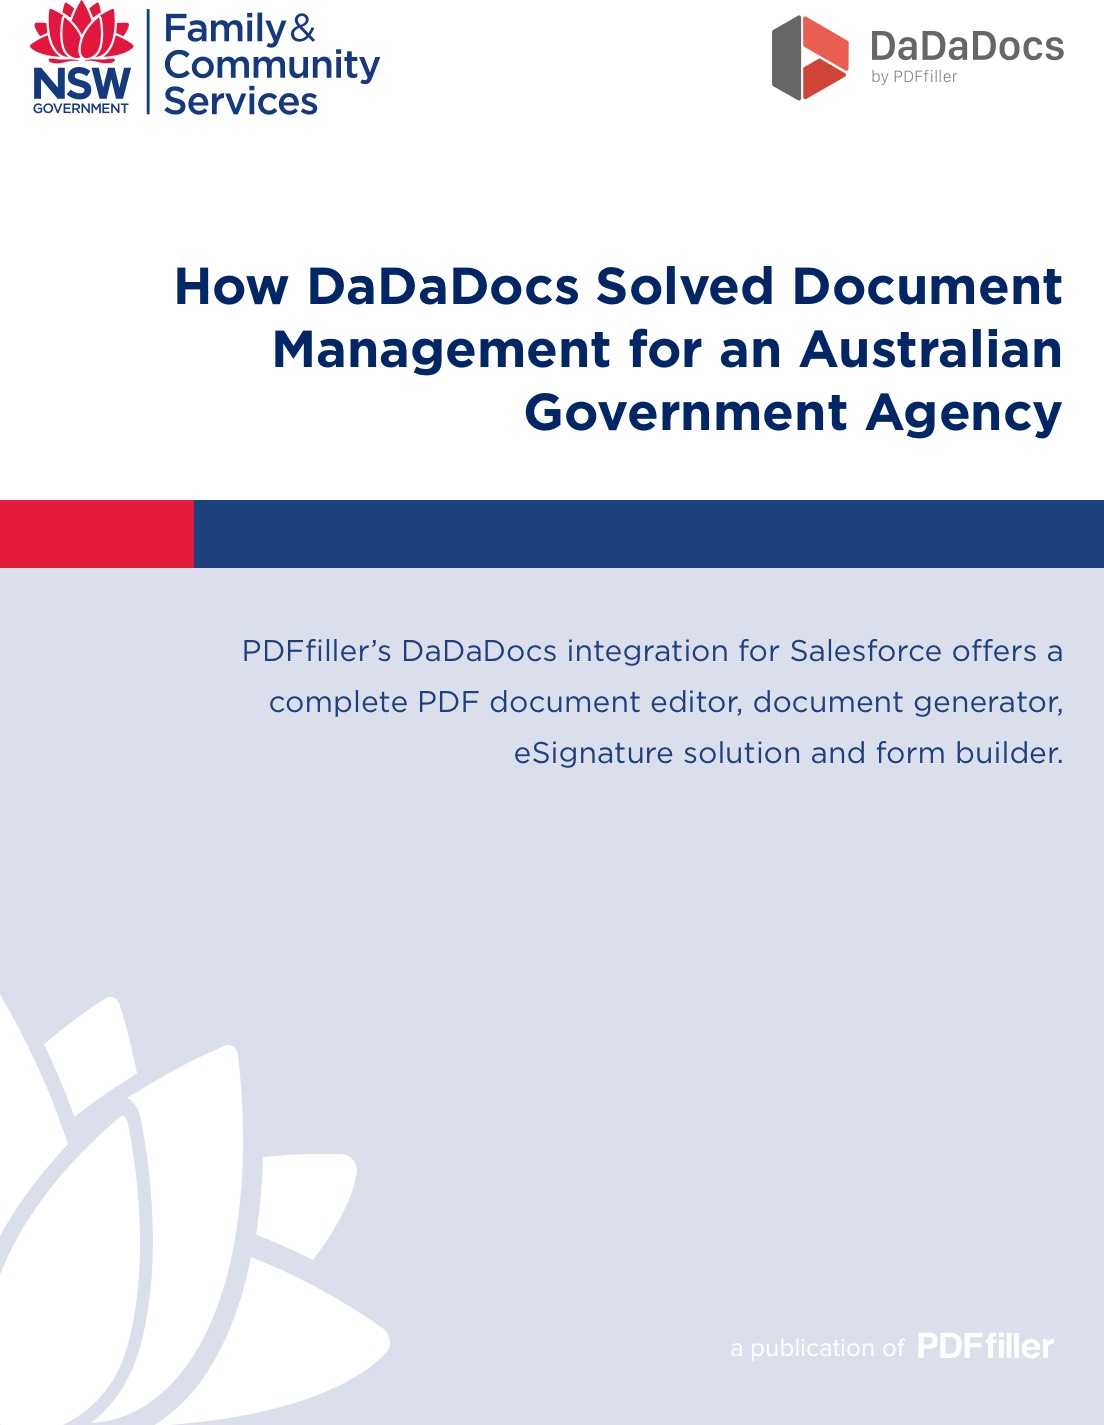 How DaDaDocs Solved Document Management for an Australian Government Agency